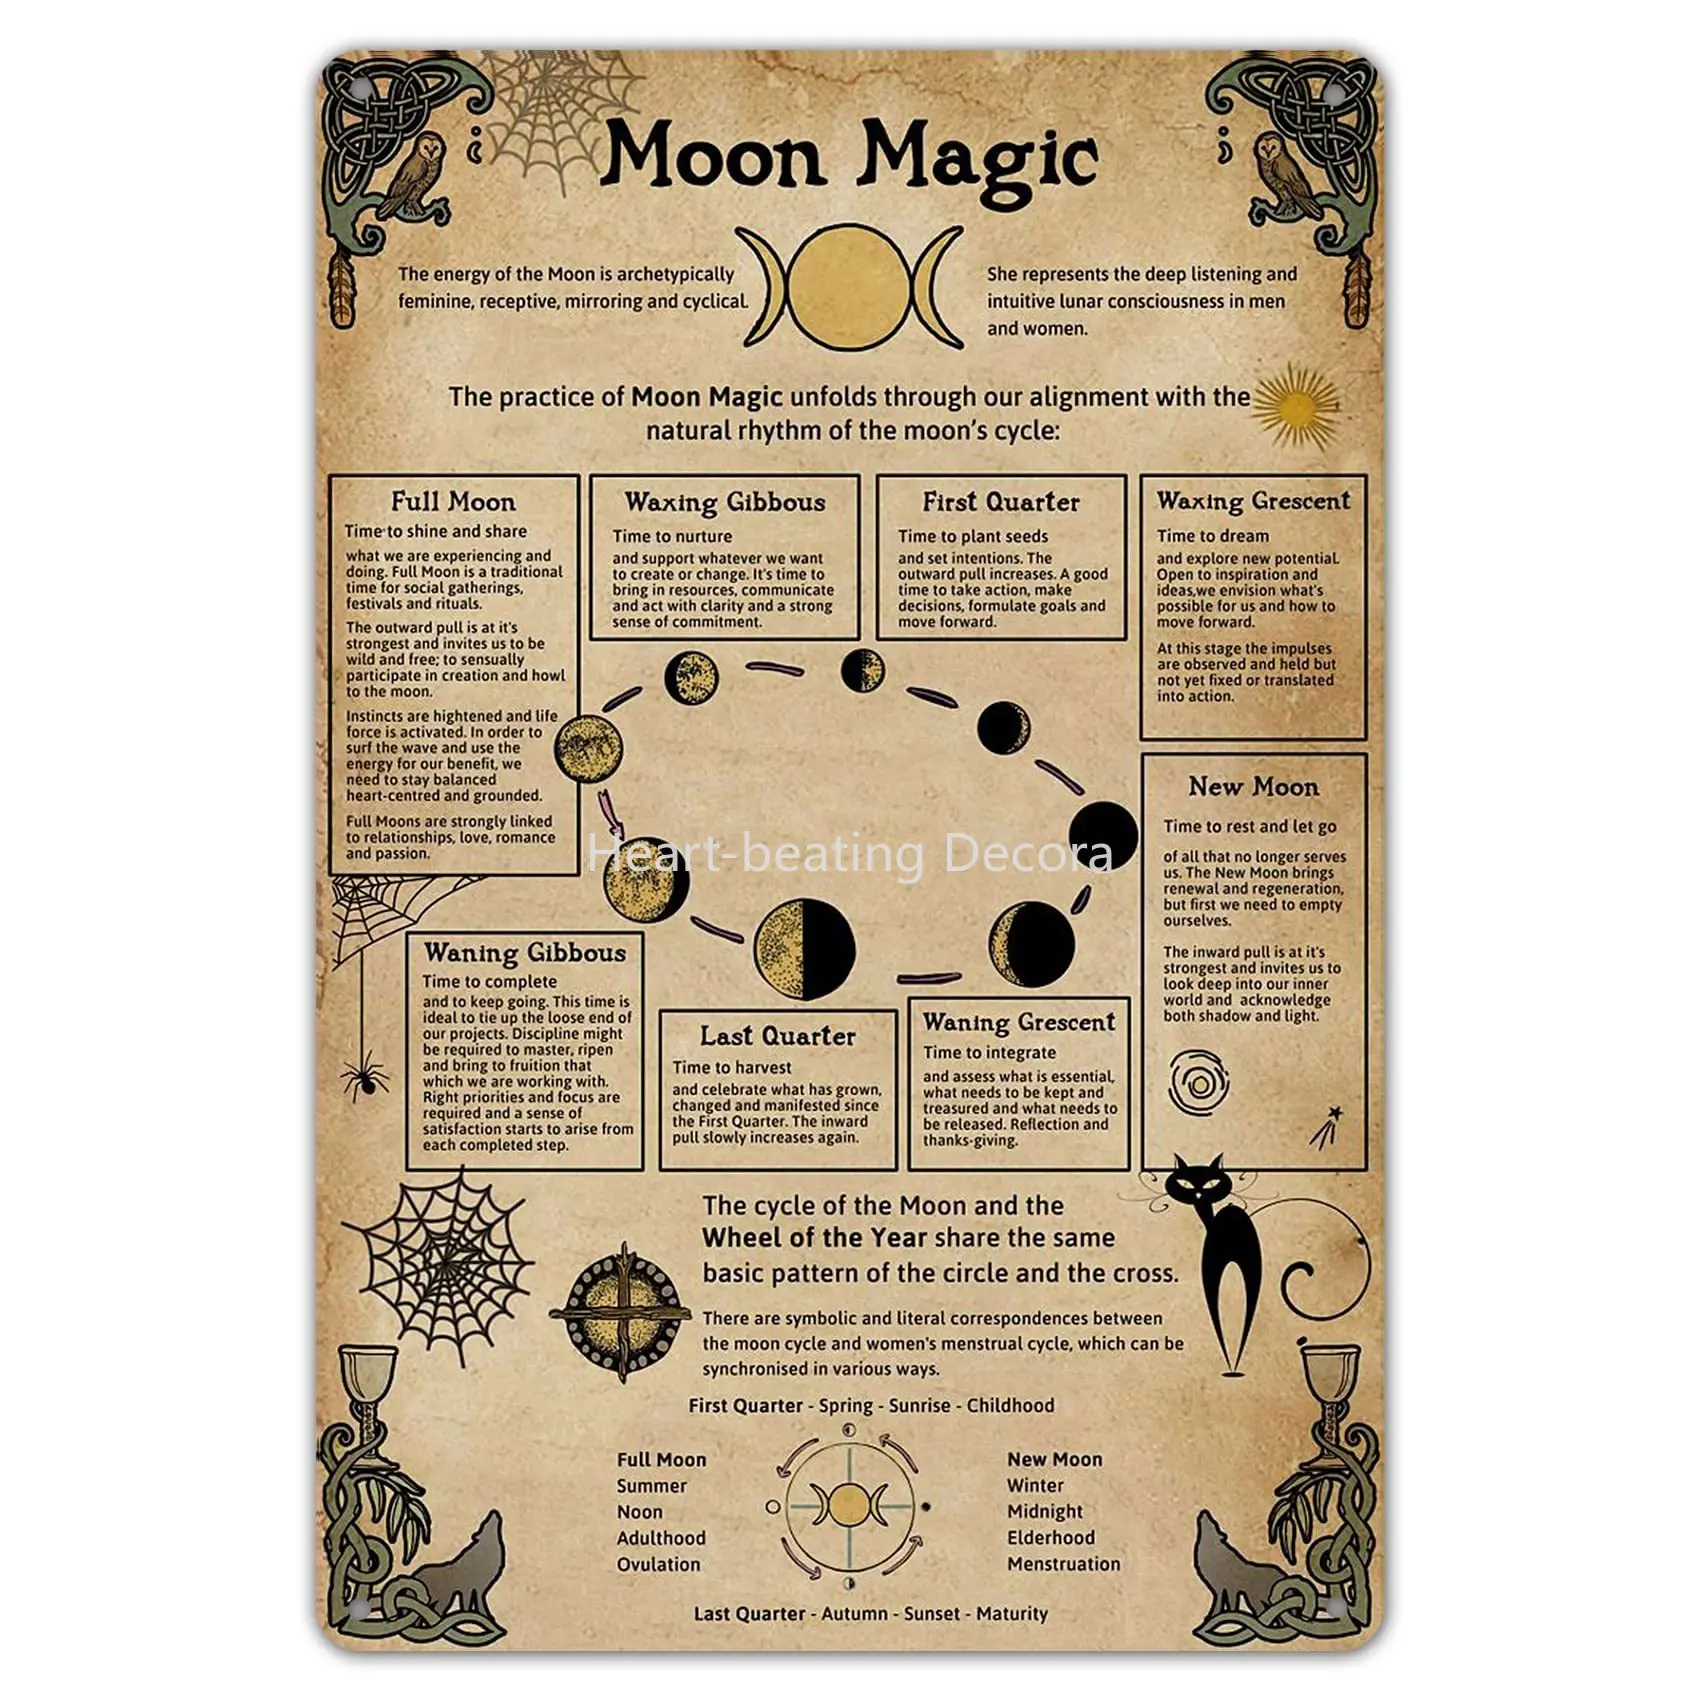 Moon Magic Knowledge Metal Tin Planning Infographic Poster Plaque for School Education Club Home Wall Decor Wall Decor Metal